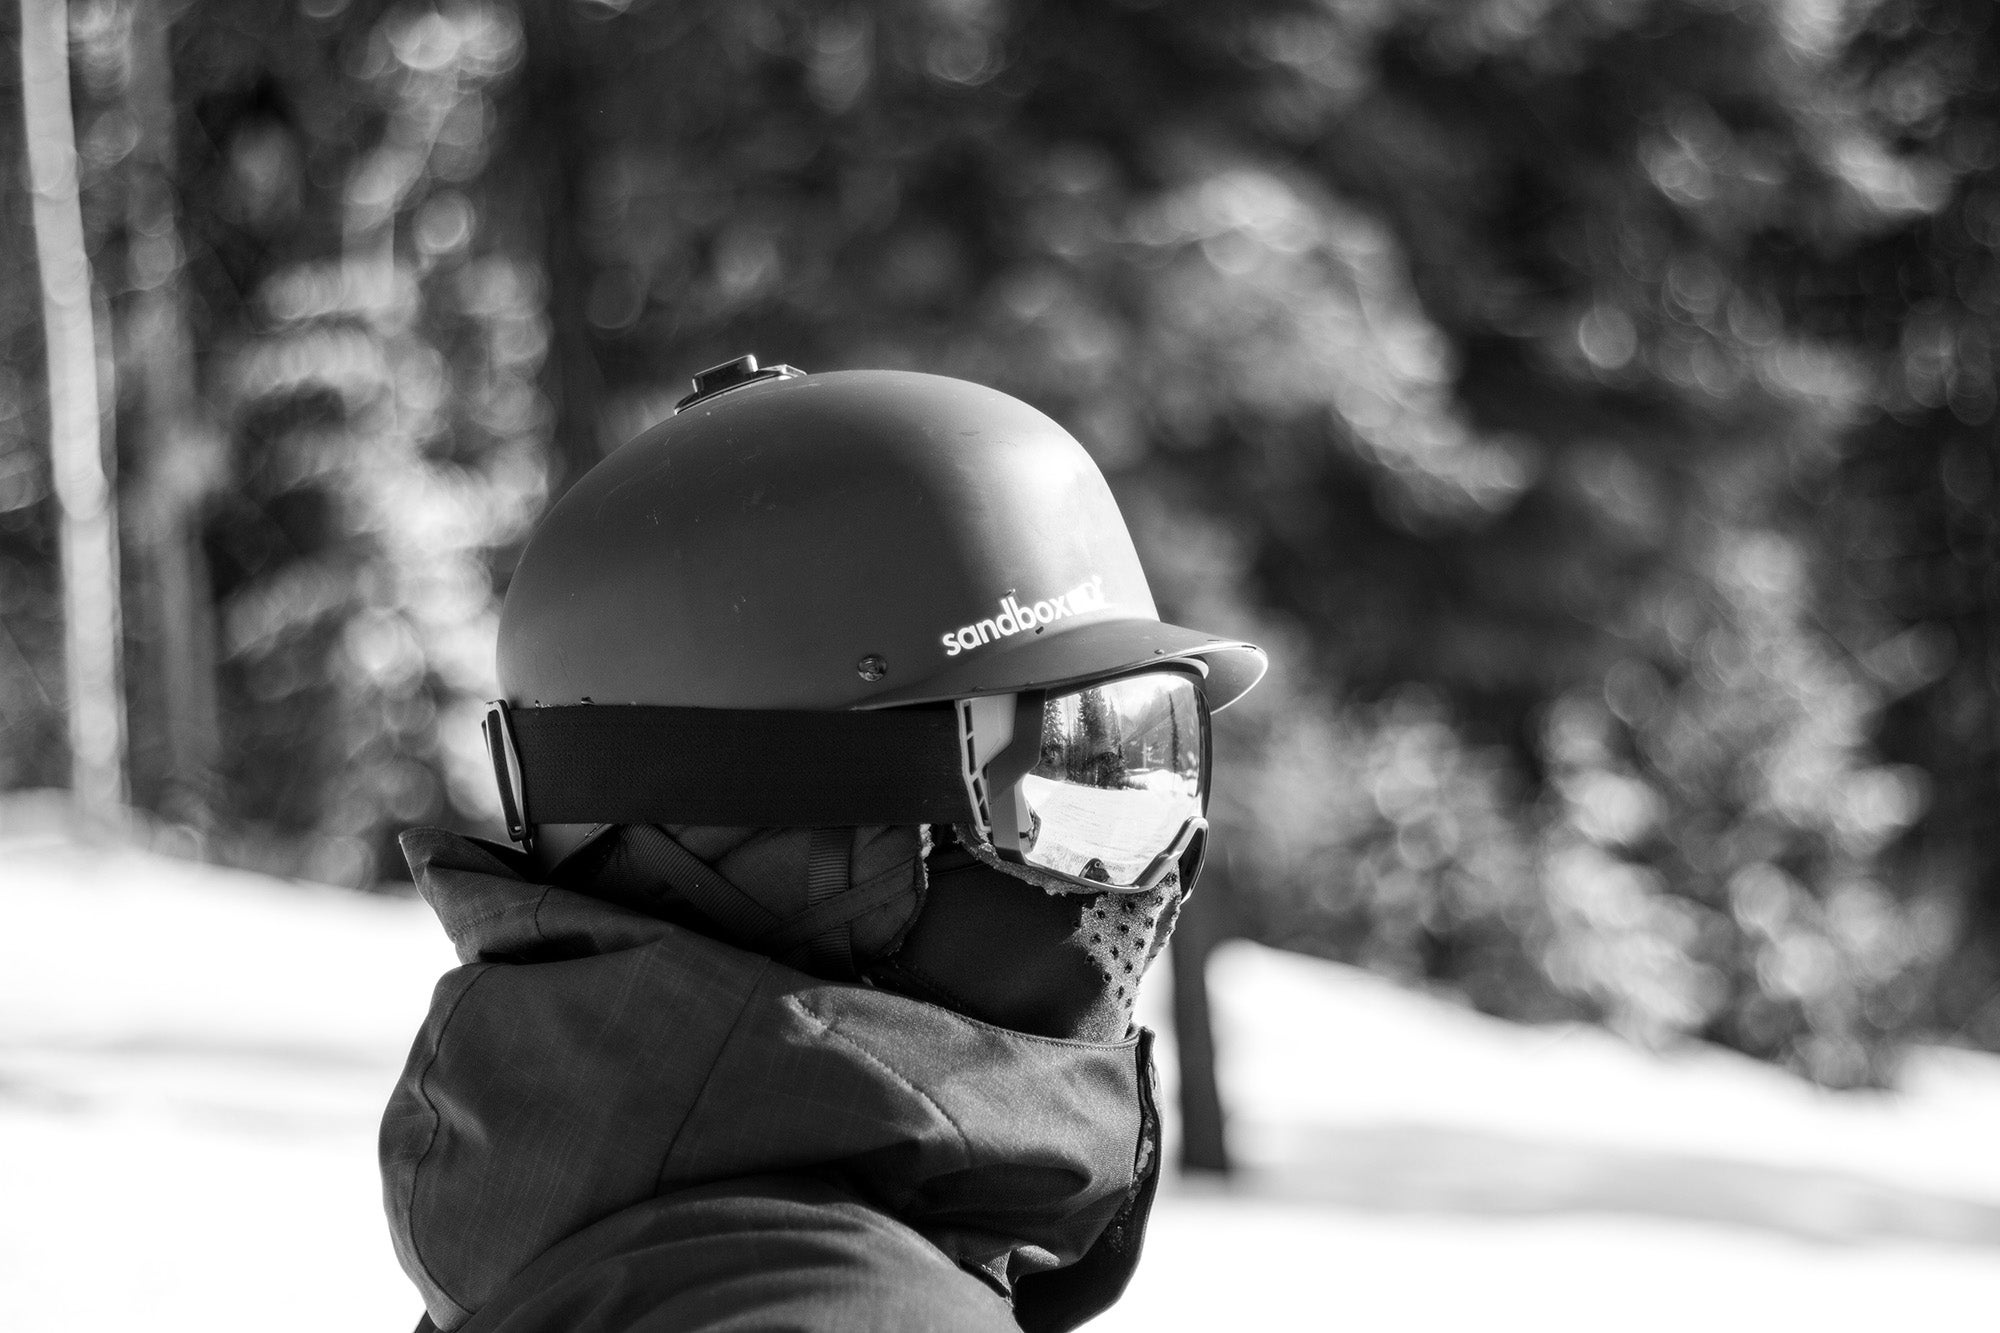 Snowboarding & Motorcycle Riding US Ski Gloves for Skiing Details about   Balaclava Ski Mask 